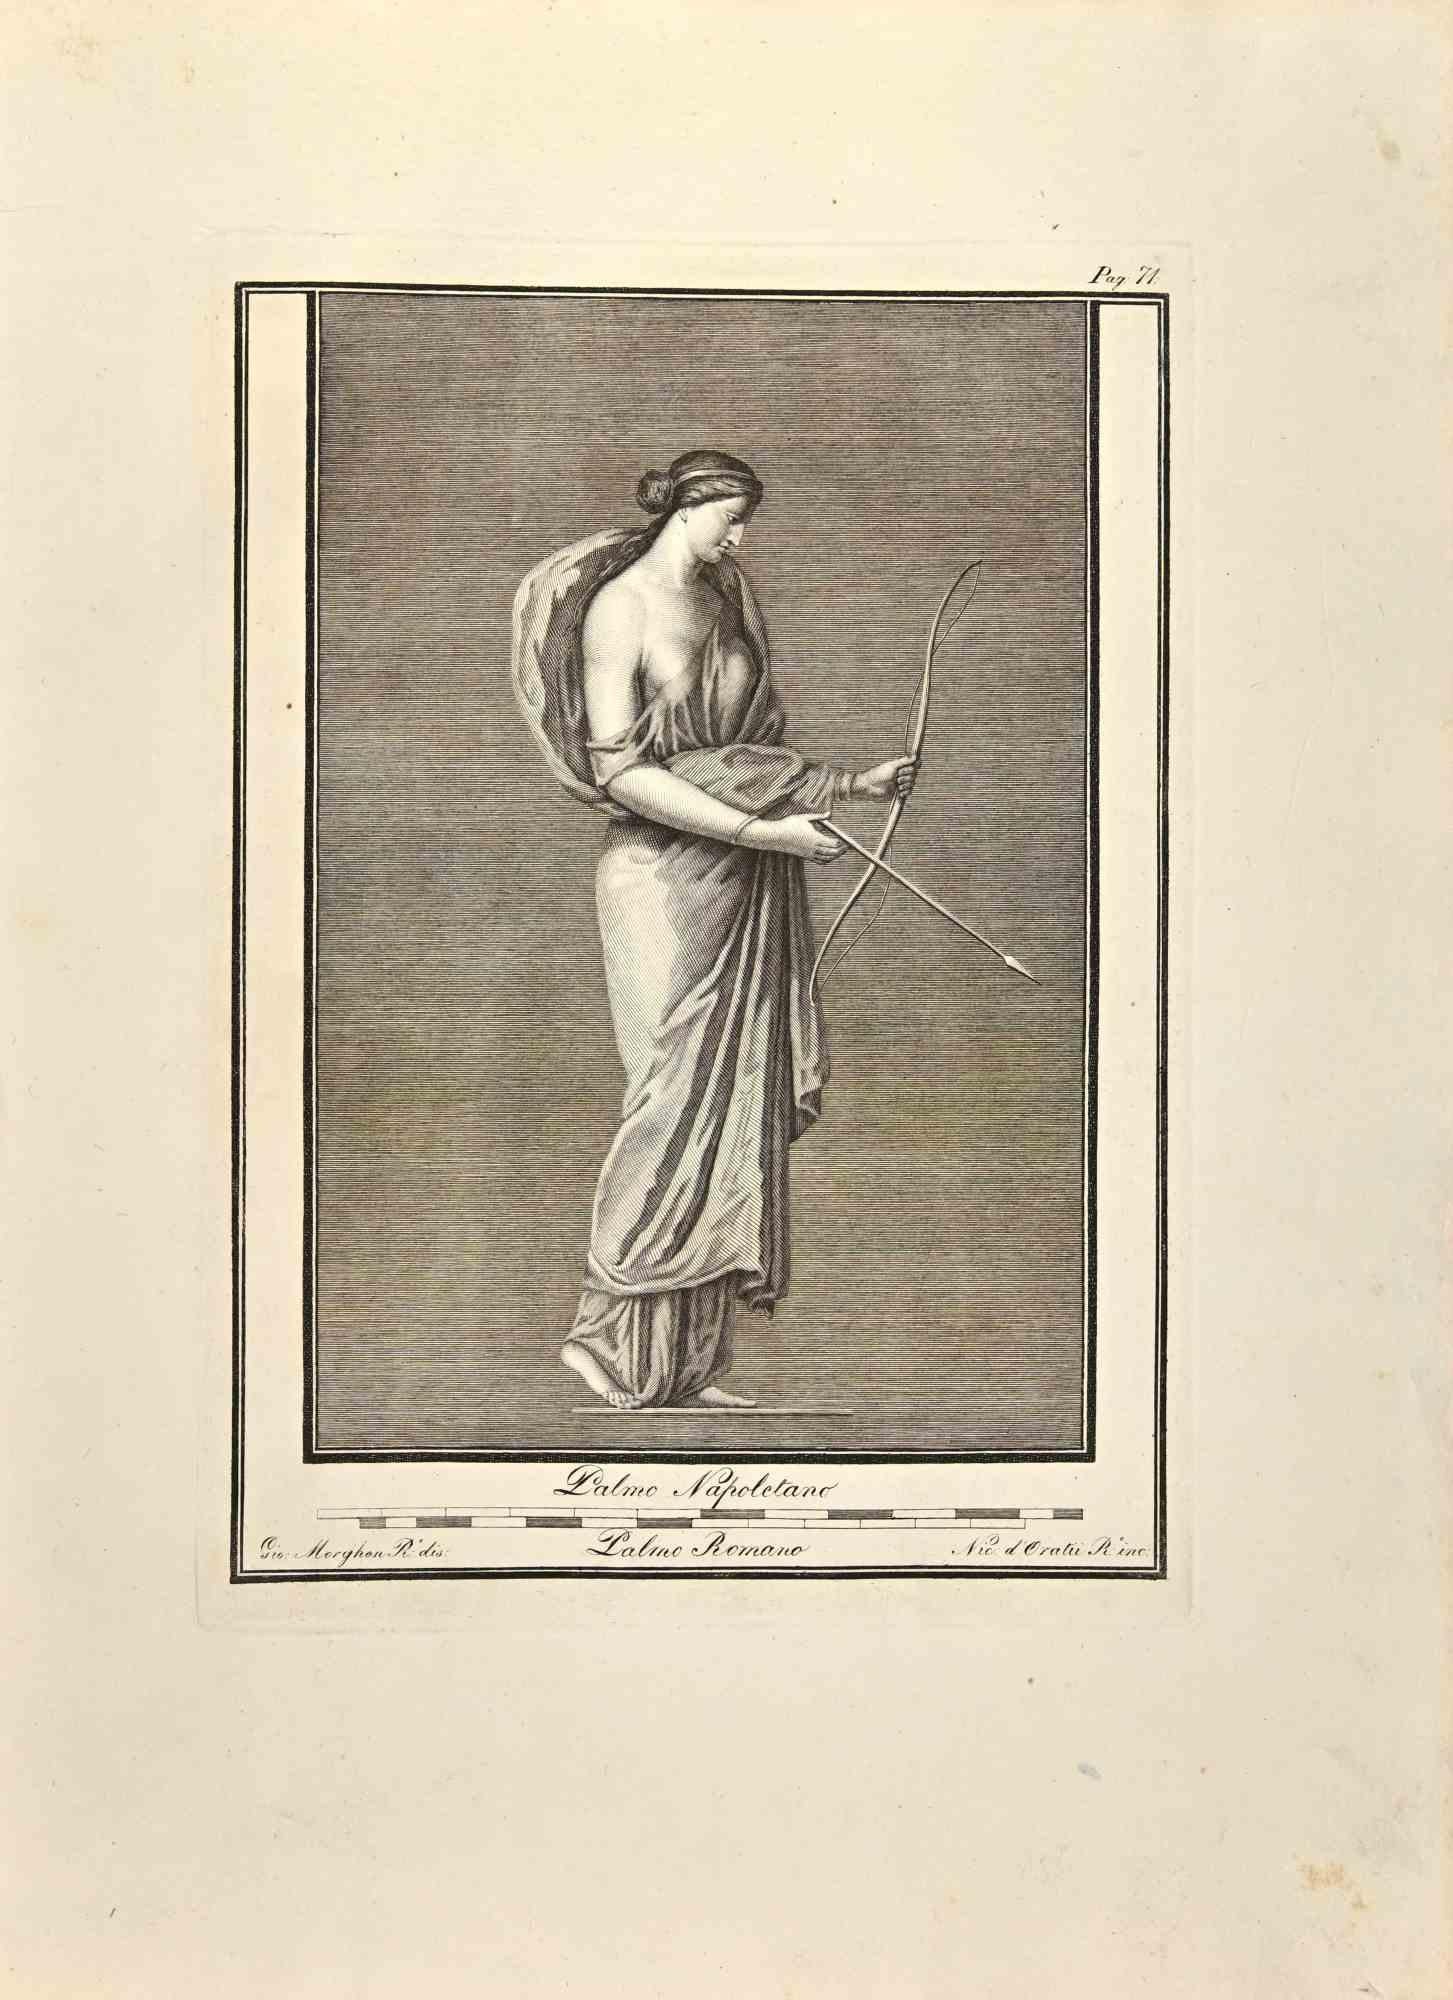 Artemis Goddess from "Antiquities of Herculaneum" is an etching on paper realized by Giovanni Morghen in the 18th Century.

Signed on the plate.

Good conditions with some folding.

The etching belongs to the print suite “Antiquities of Herculaneum